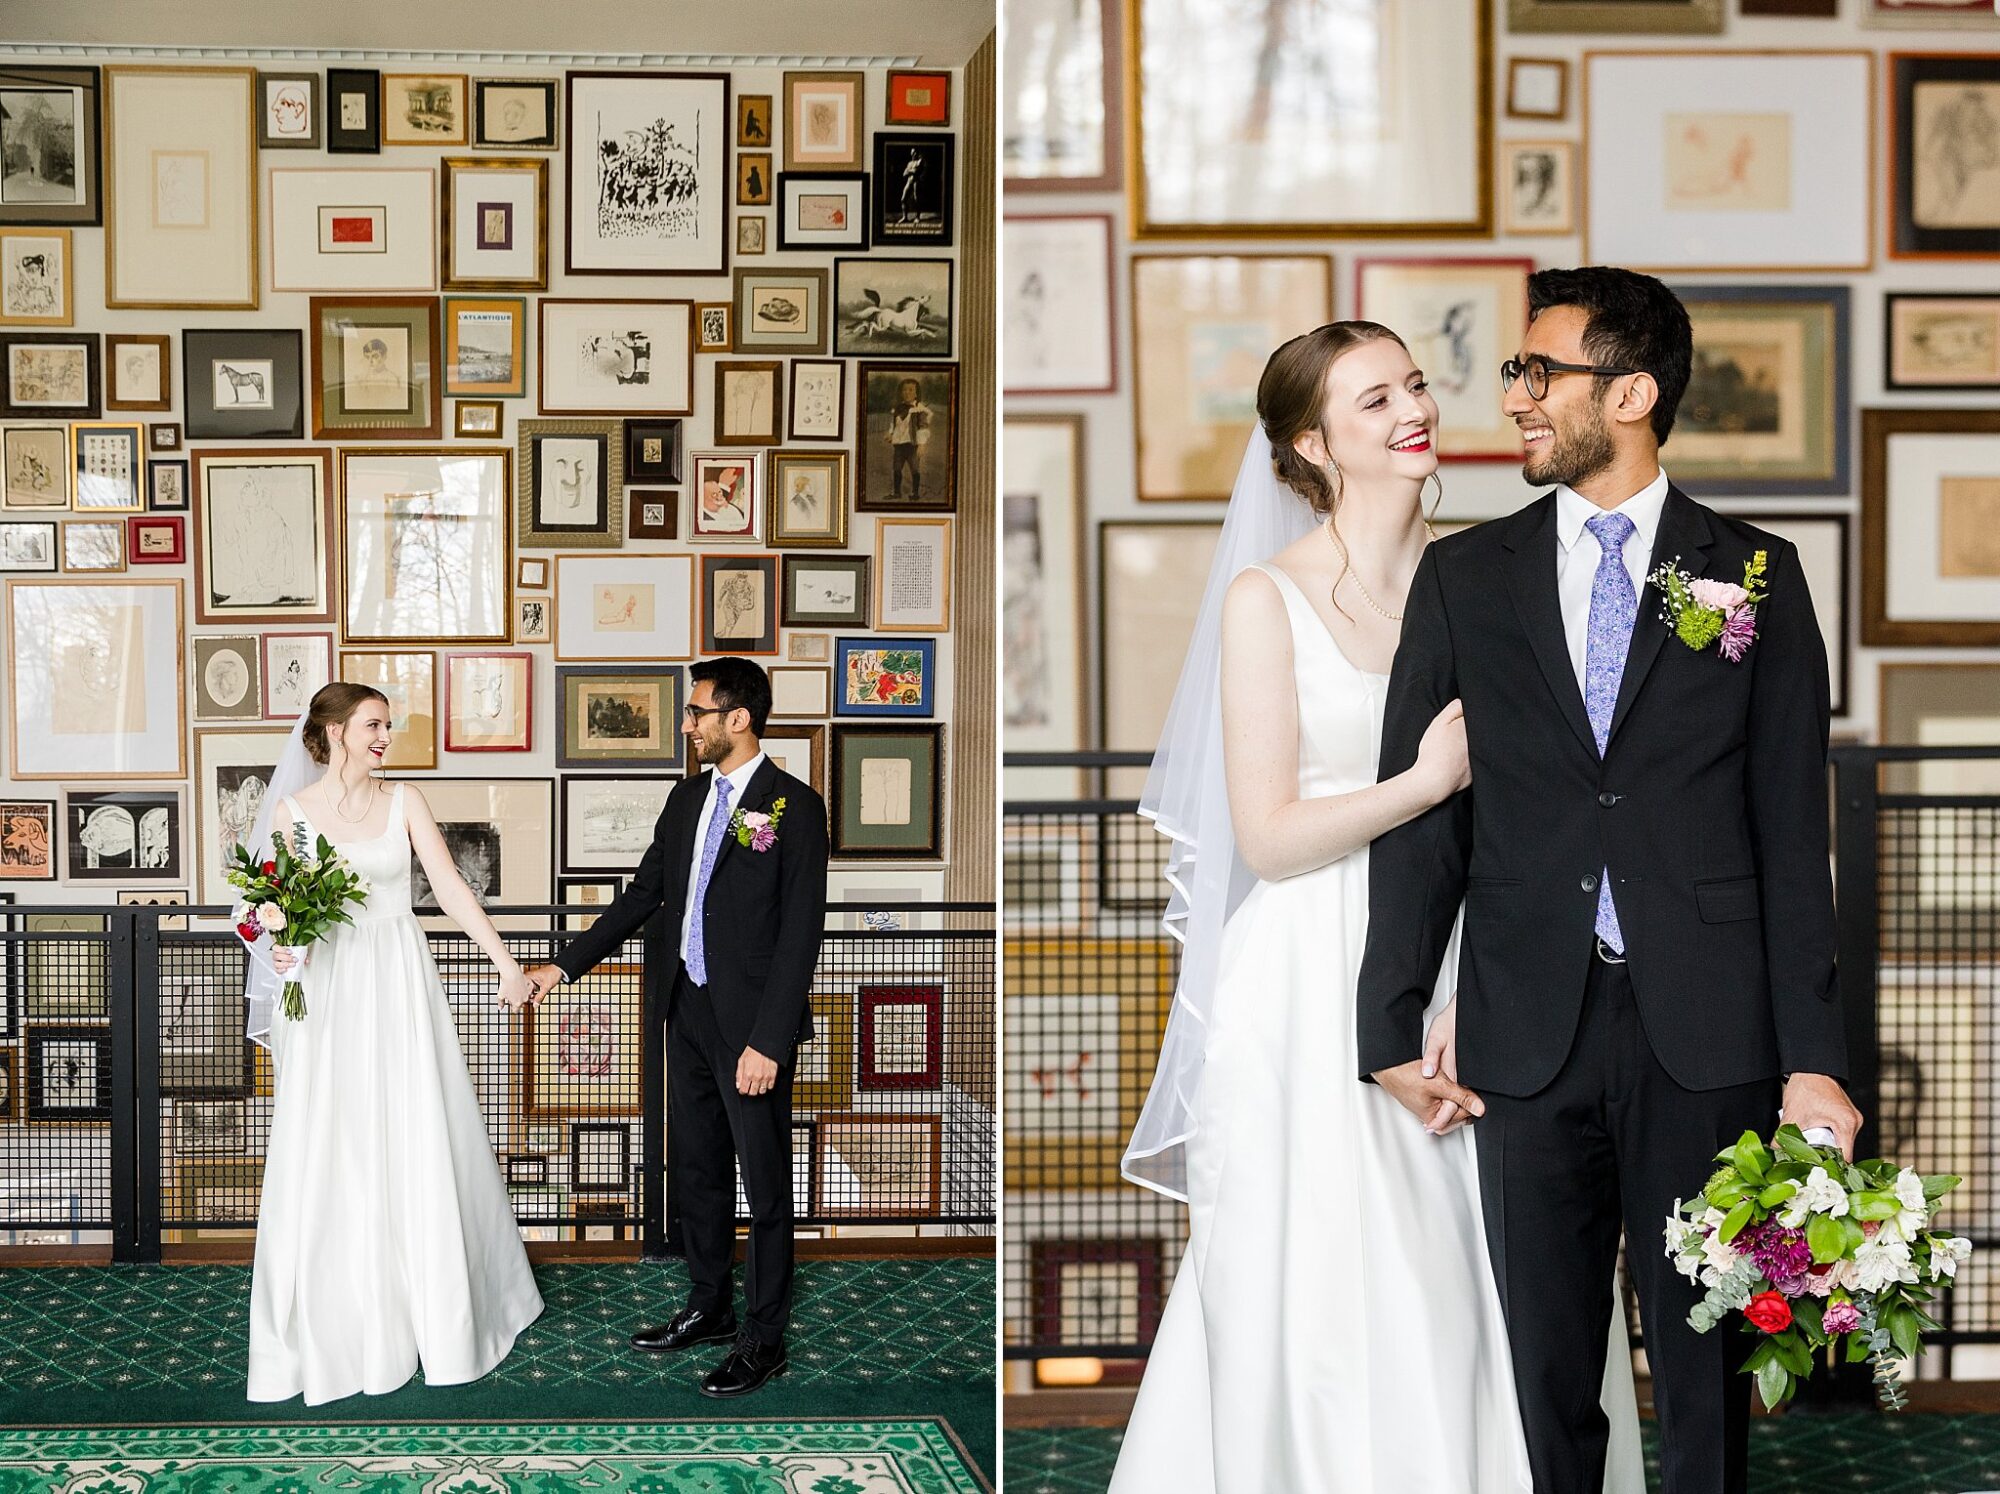 Wedding photographs of a bride and groom standing in front of the picture frame wall at the Graduate Hotel in East Lansing, Michigan